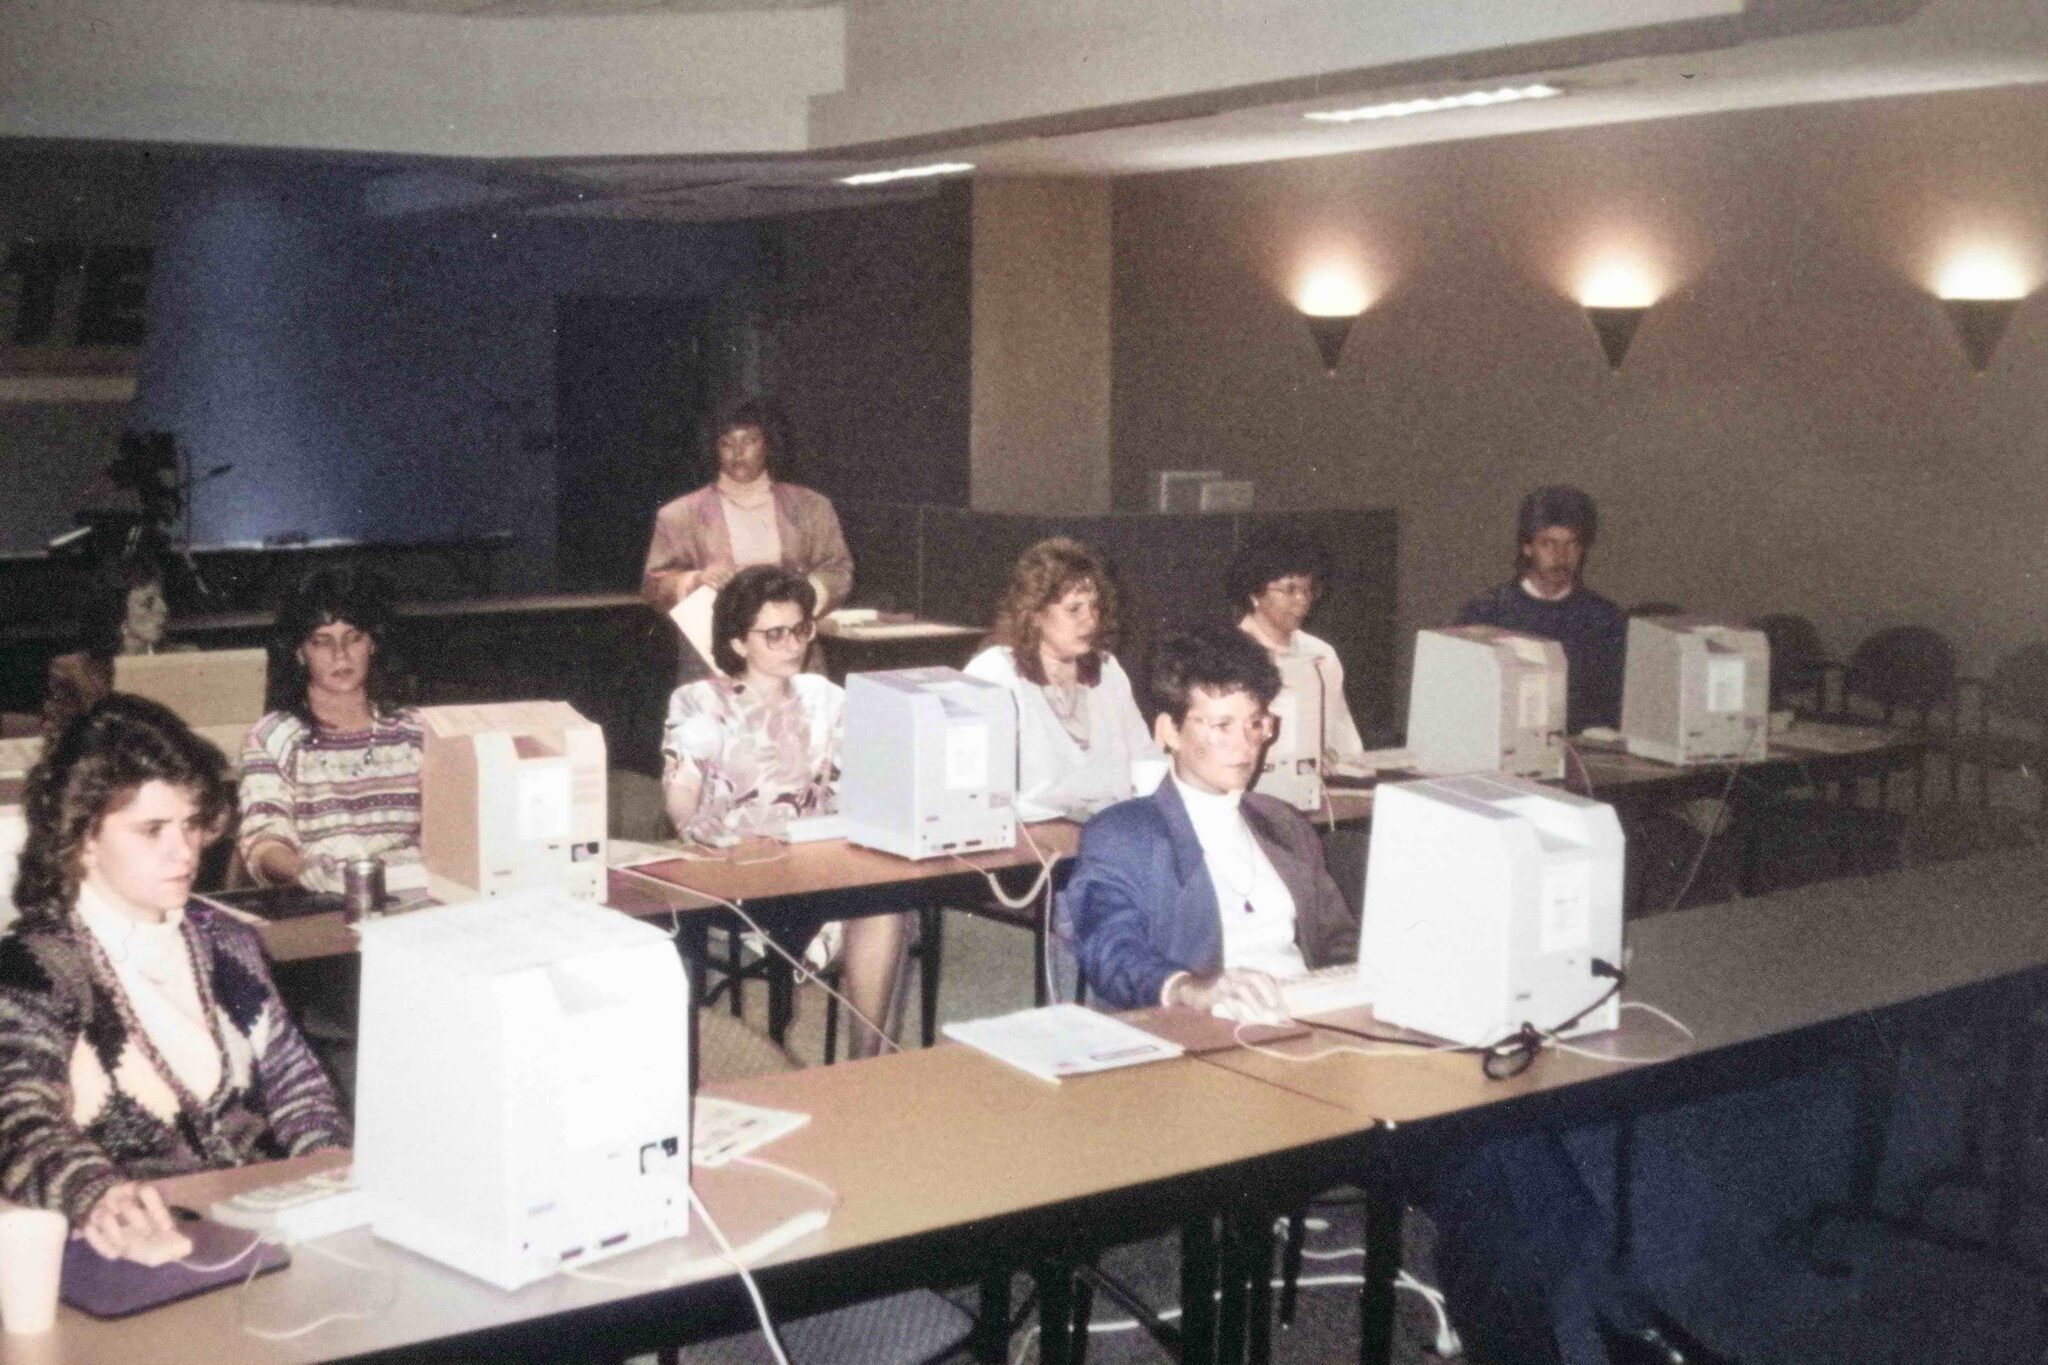 1989 image of female Korte employees in a computer room, working at individual desktop computers.